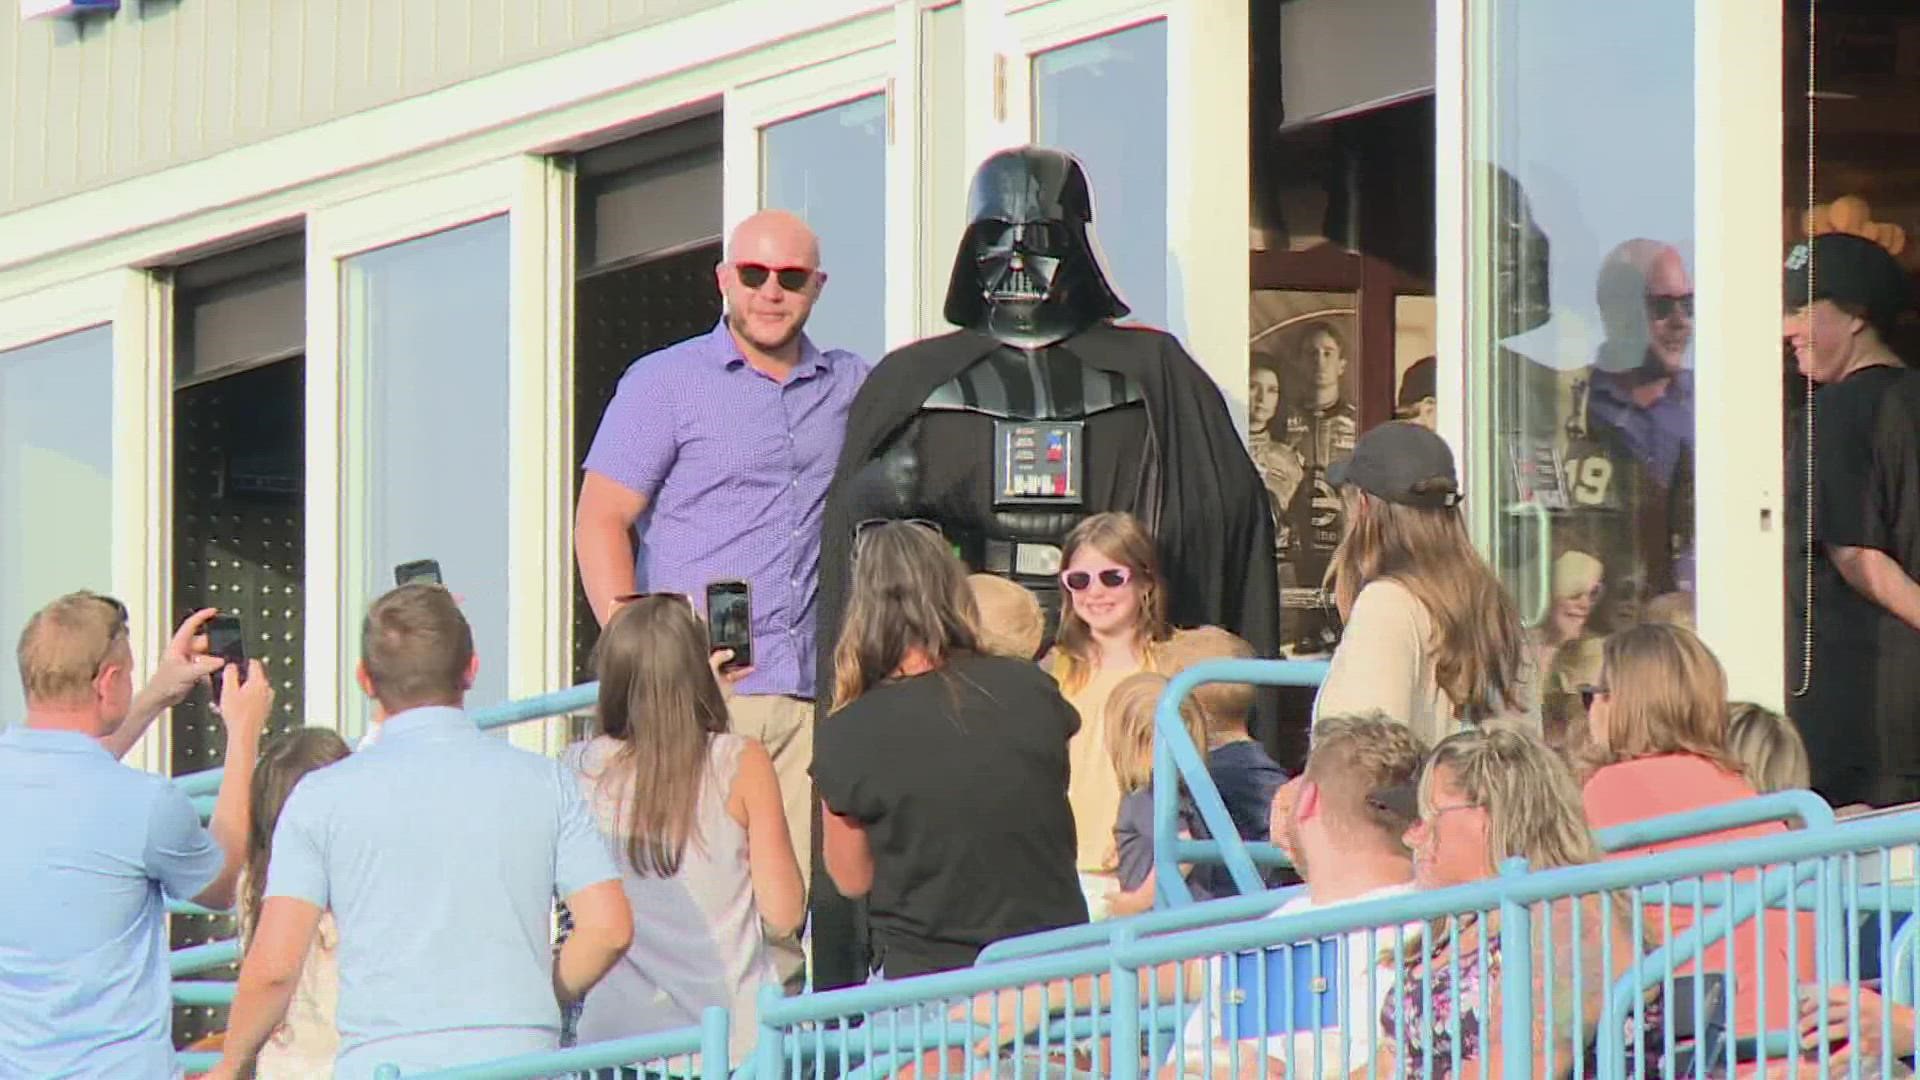 The force was with the Whitecaps as they defeated the Wisconsin Timber Rattlers 3-1 on Saturday afternoon.